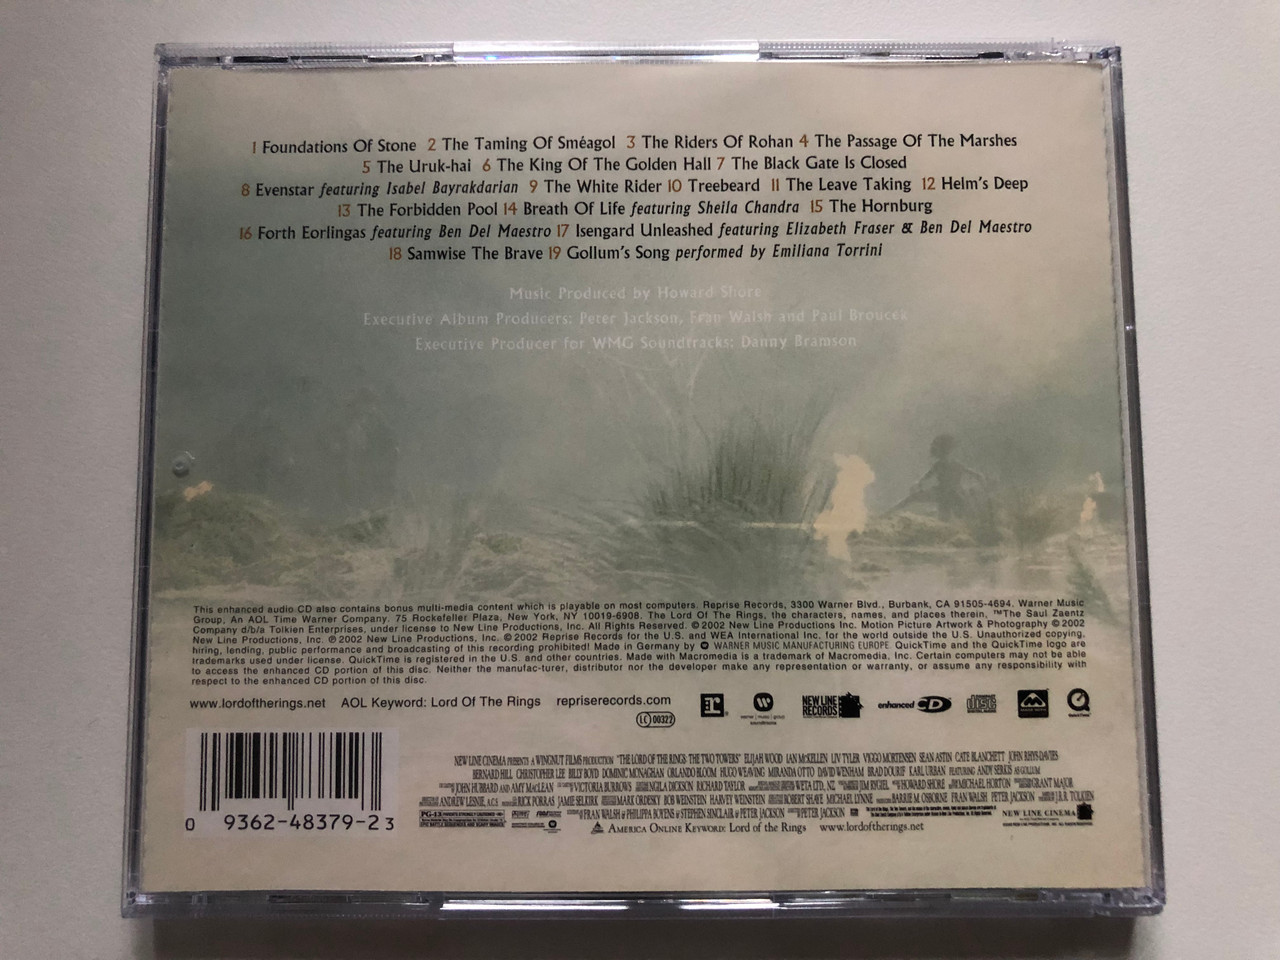 https://cdn10.bigcommerce.com/s-62bdpkt7pb/products/0/images/216381/The_Lord_Of_The_Rings_The_Two_Towers_Original_Motion_Picture_Soundtrack_Music_Composed_Orchestrated_and_Conducted_By_Howard_Shore_Reprise_Records_Audio_CD_2002_9362-48379-2_8__29022.1647271840.1280.1280.JPG?c=2&_gl=1*lh045y*_ga*MjA2NTIxMjE2MC4xNTkwNTEyNTMy*_ga_WS2VZYPC6G*MTY0NzI3MDg0Ny4zMTkuMS4xNjQ3MjcxNzIyLjYw